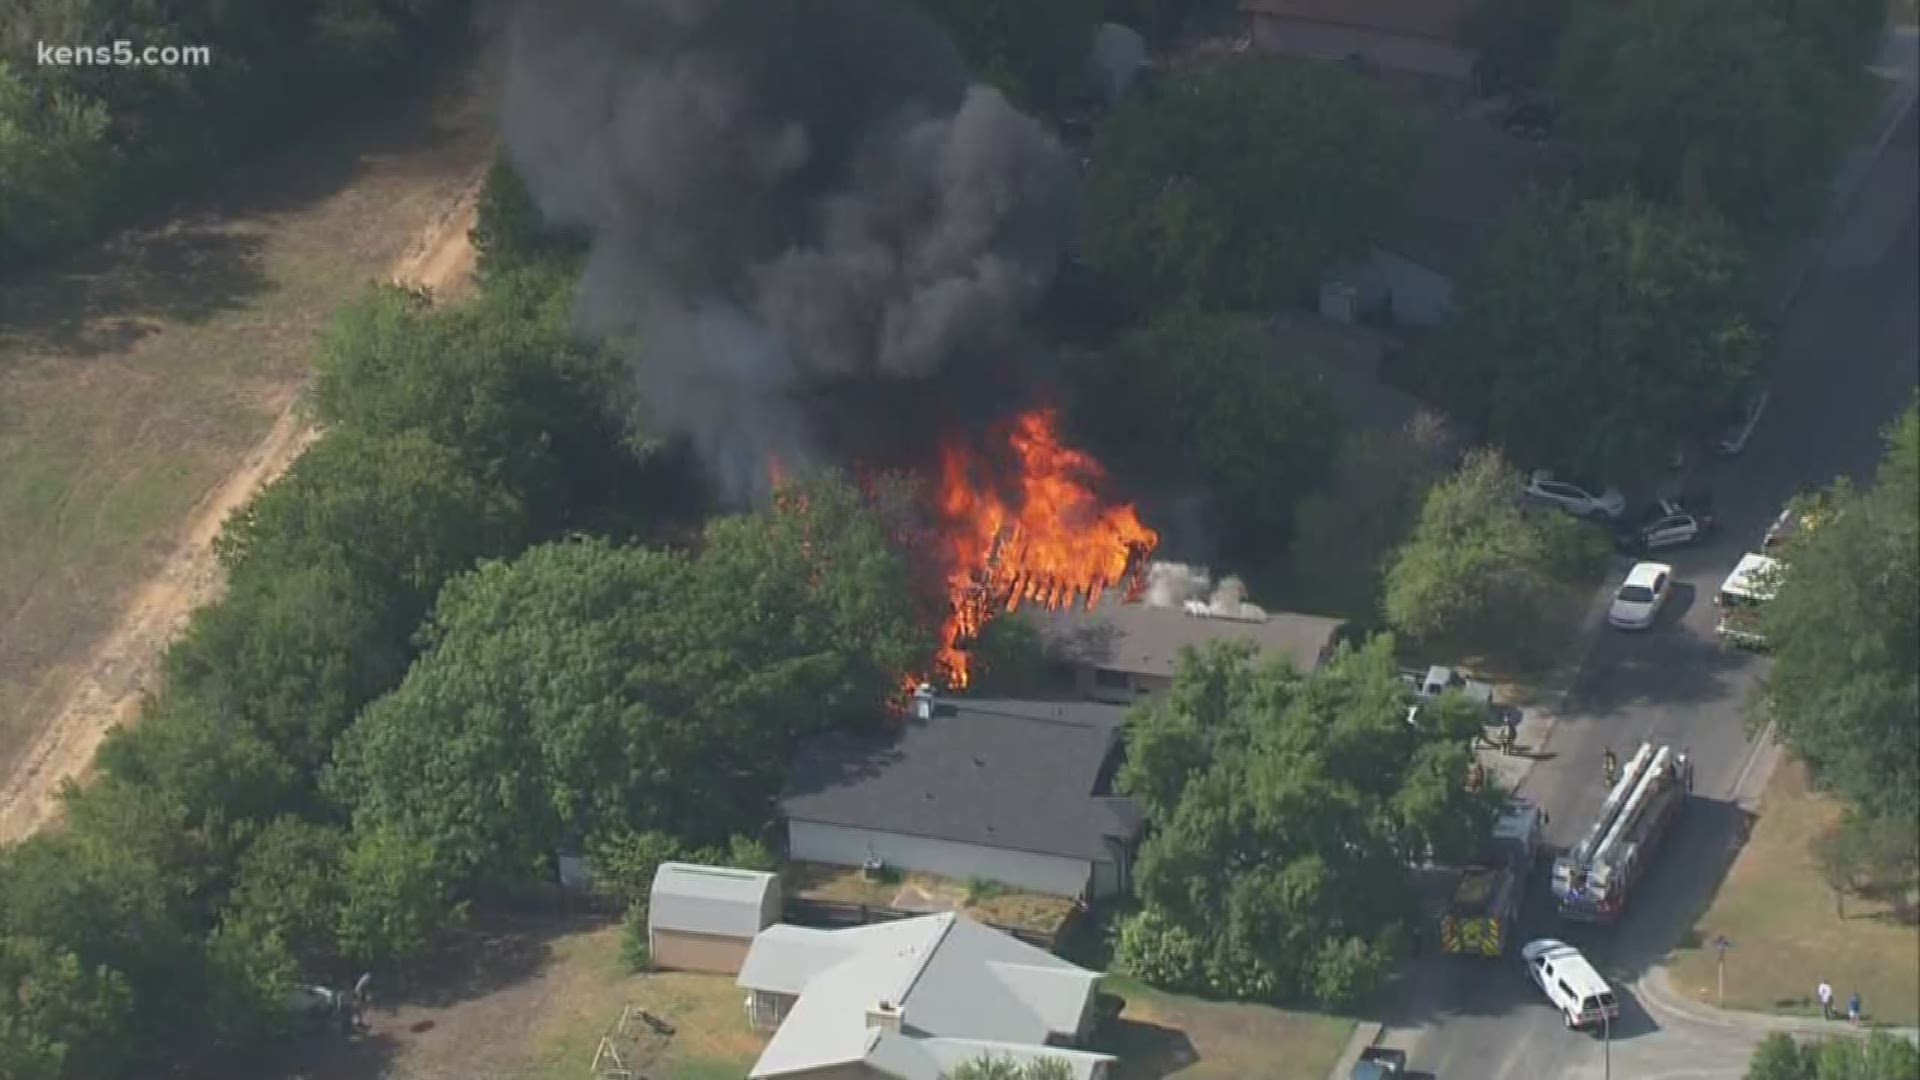 More than a dozen San Antonio Fire units made their way to a northeast San Antonio neighborhood Tuesday afternoon after a massive house fire erupted on the 4200 block of Misty Springs Drive, near Candlewood Park.